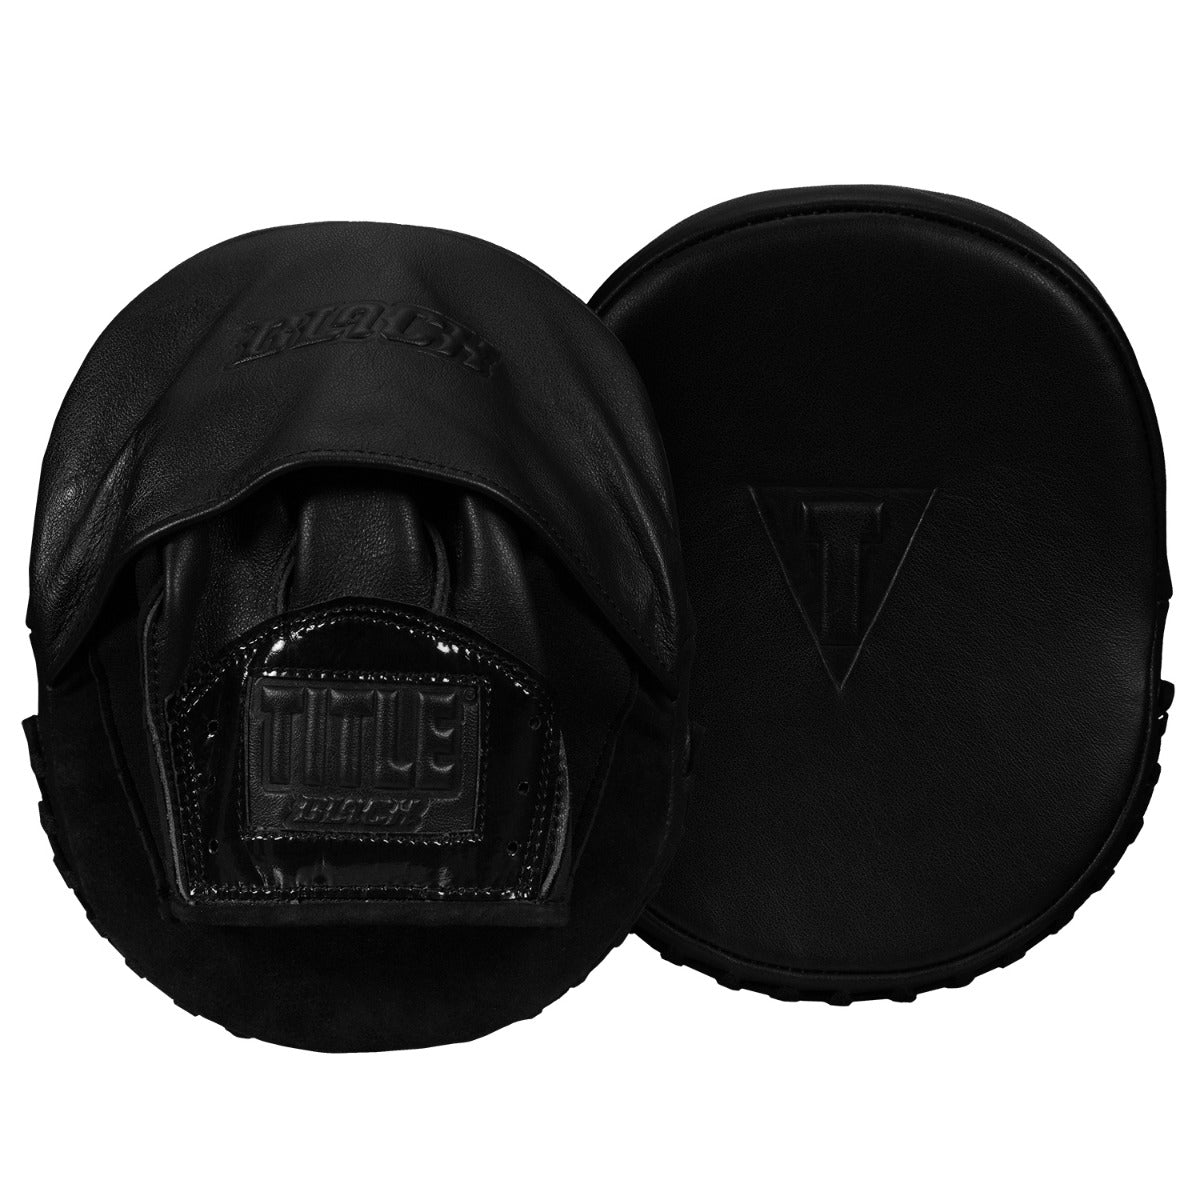 TITLE BLACK Punch Mitts 2.0 